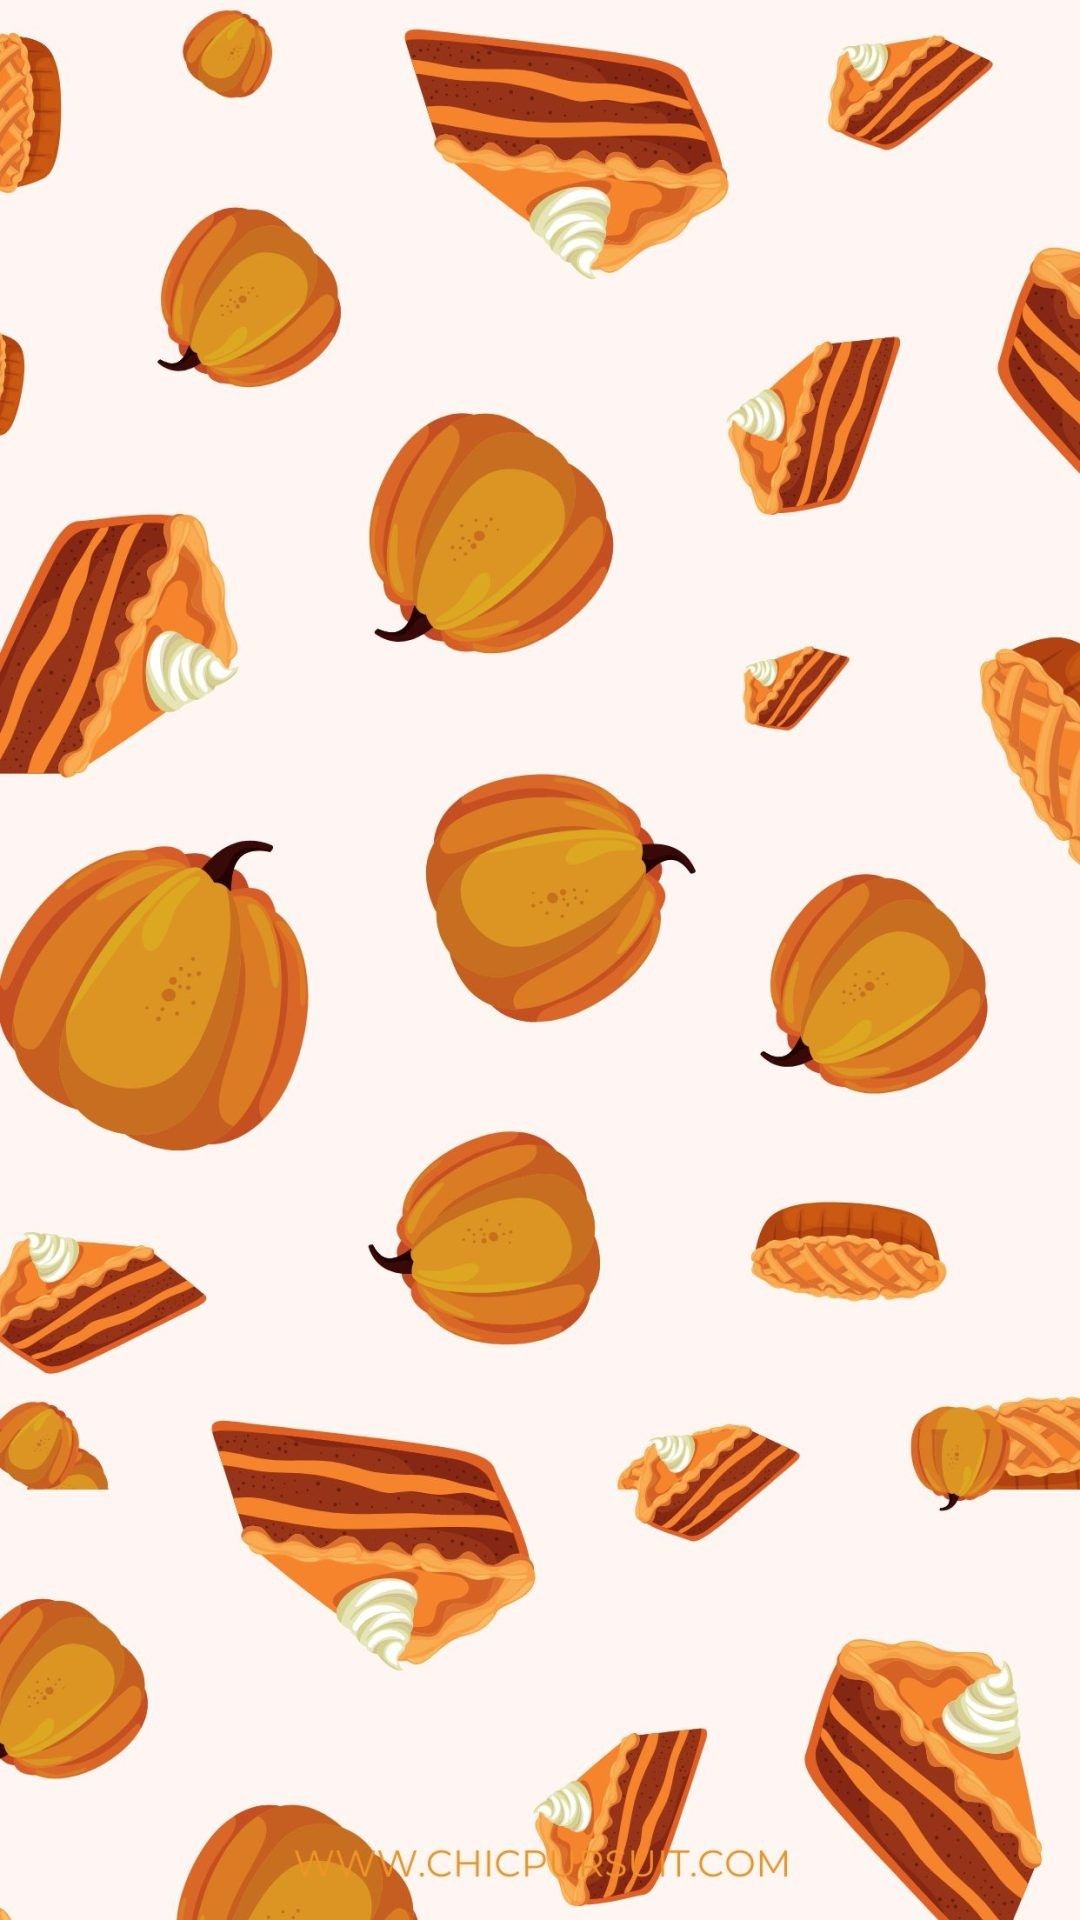 Cute Thanksgiving Wallpaper For iPhone (Free Download)